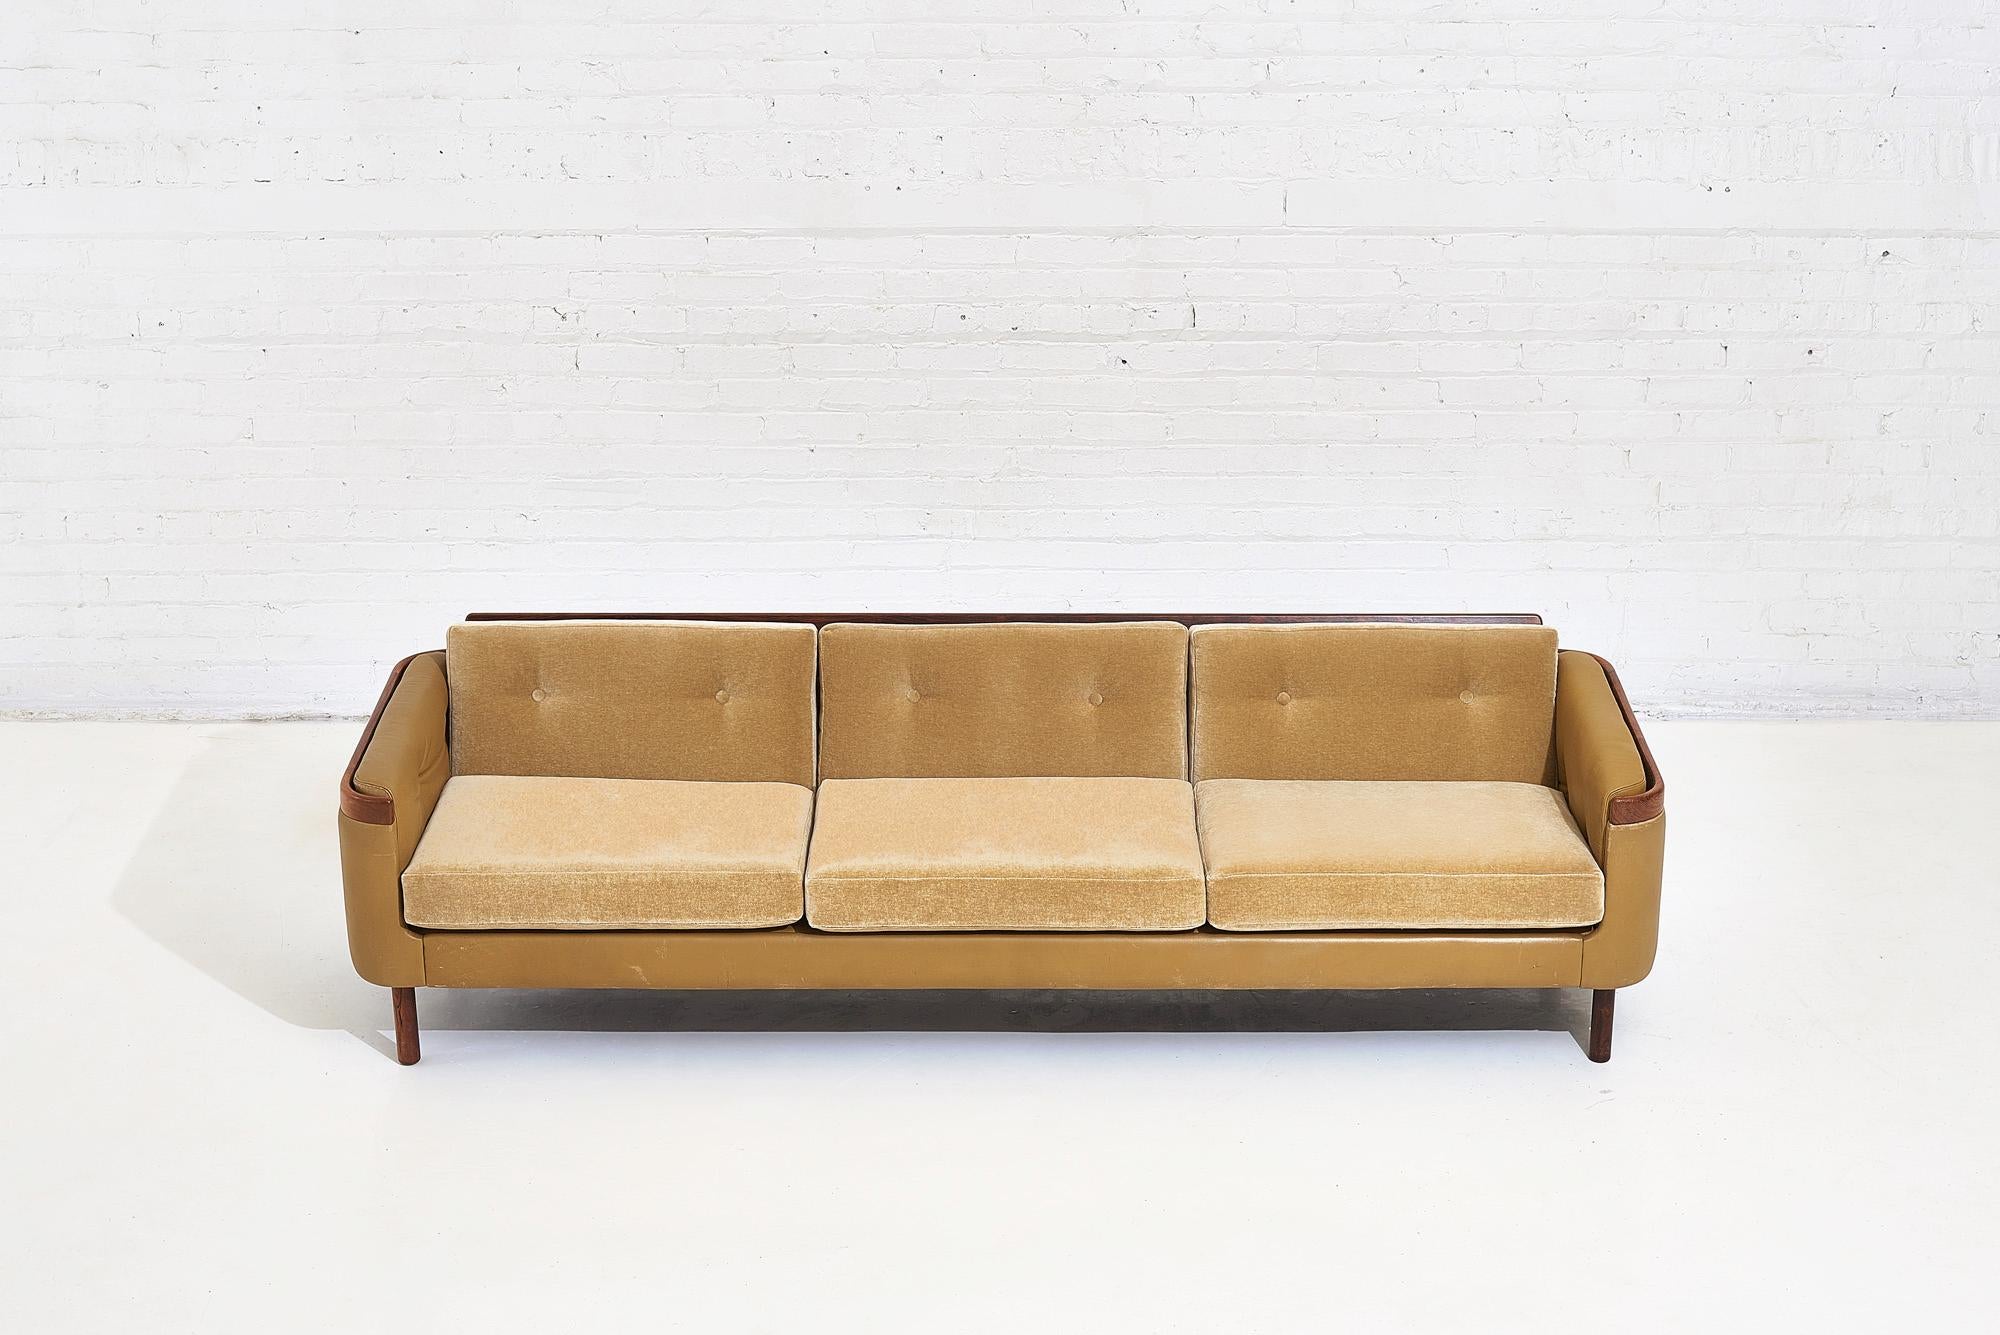 Rosewood sofa by Sigurd Resell for Vatne Mobler, circa 1960. Rosewood and leather frame with plush mohair cushions. Leather has nice broken in patina.